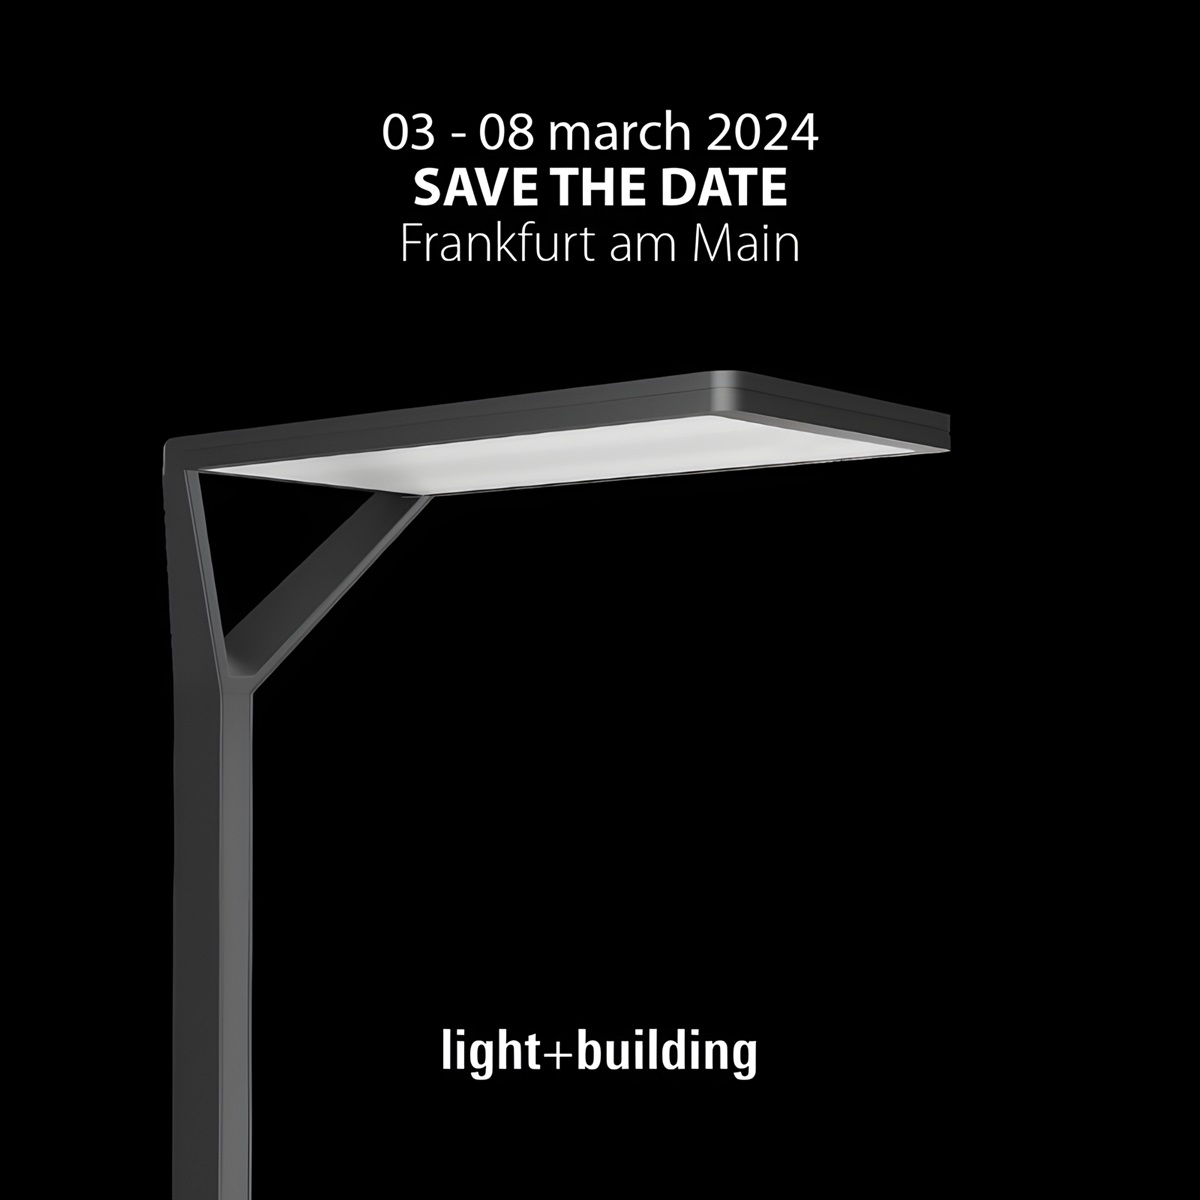 Performance iN Lighting to Present the New SL730+ Free-standing Luminaire Series at Light + Building